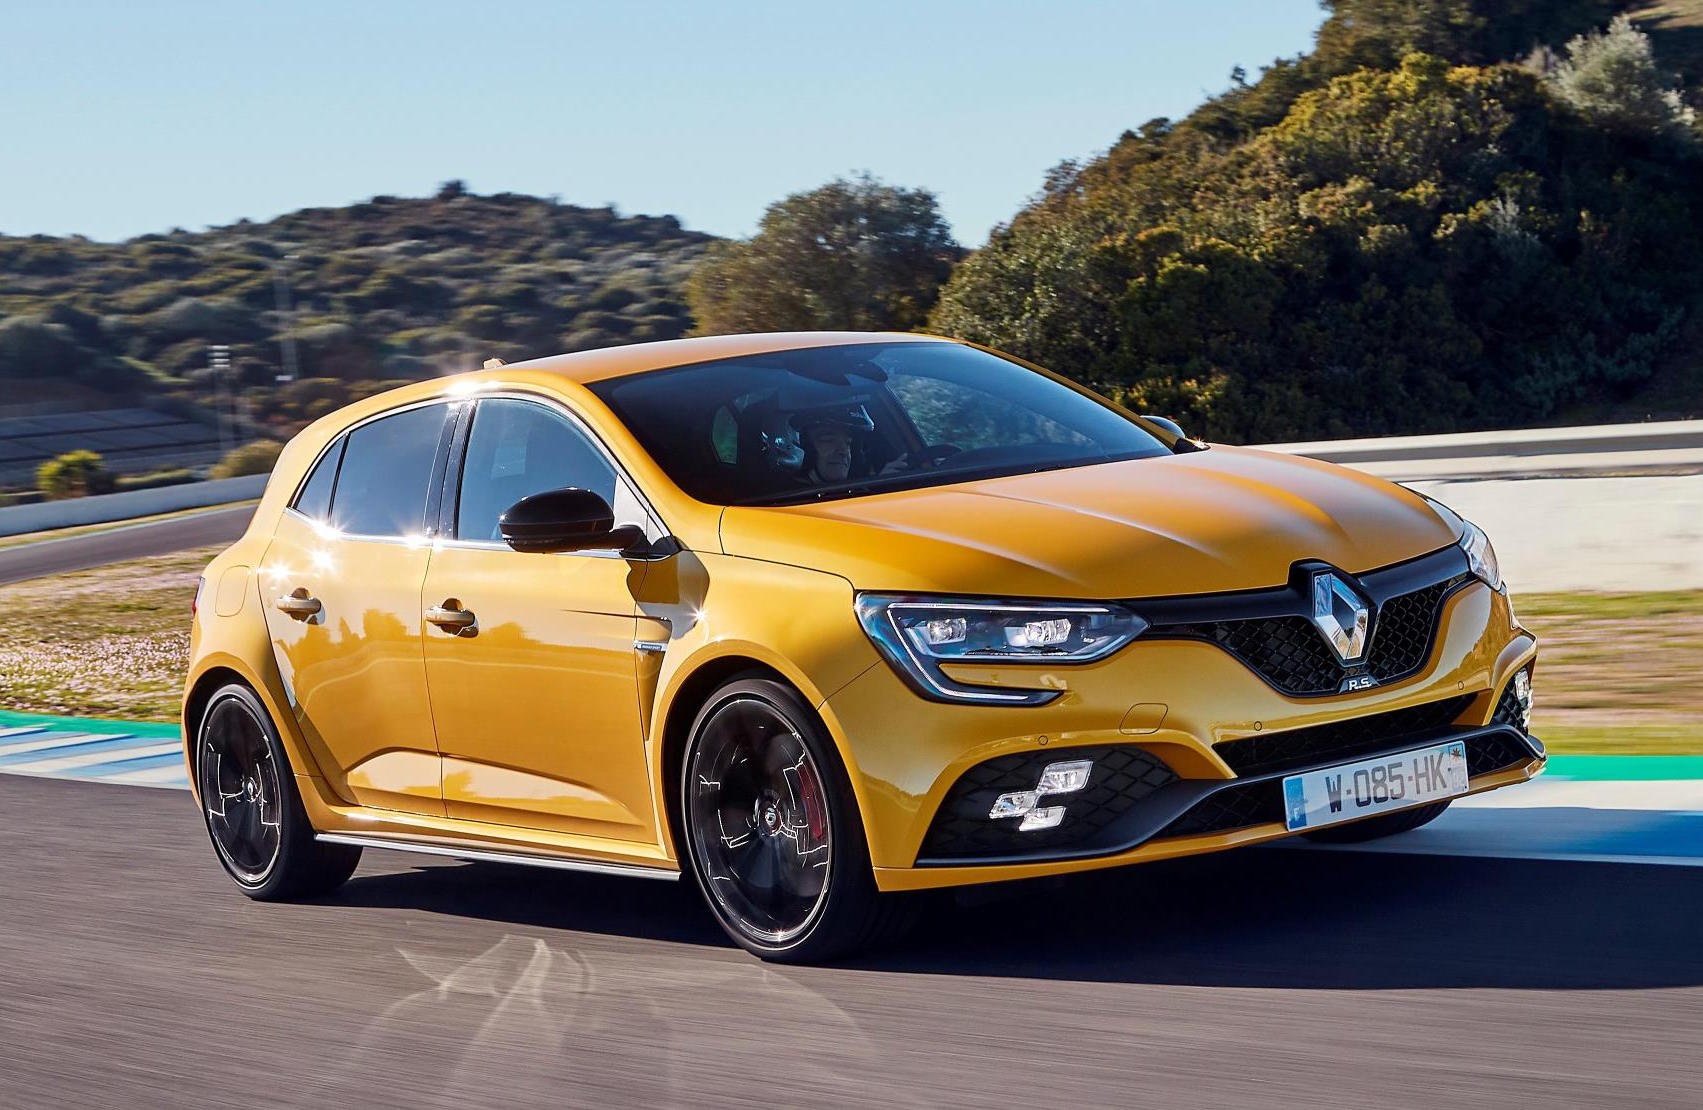 Renault Australia confirms Megane R.S. 280 getting Cup chassis option